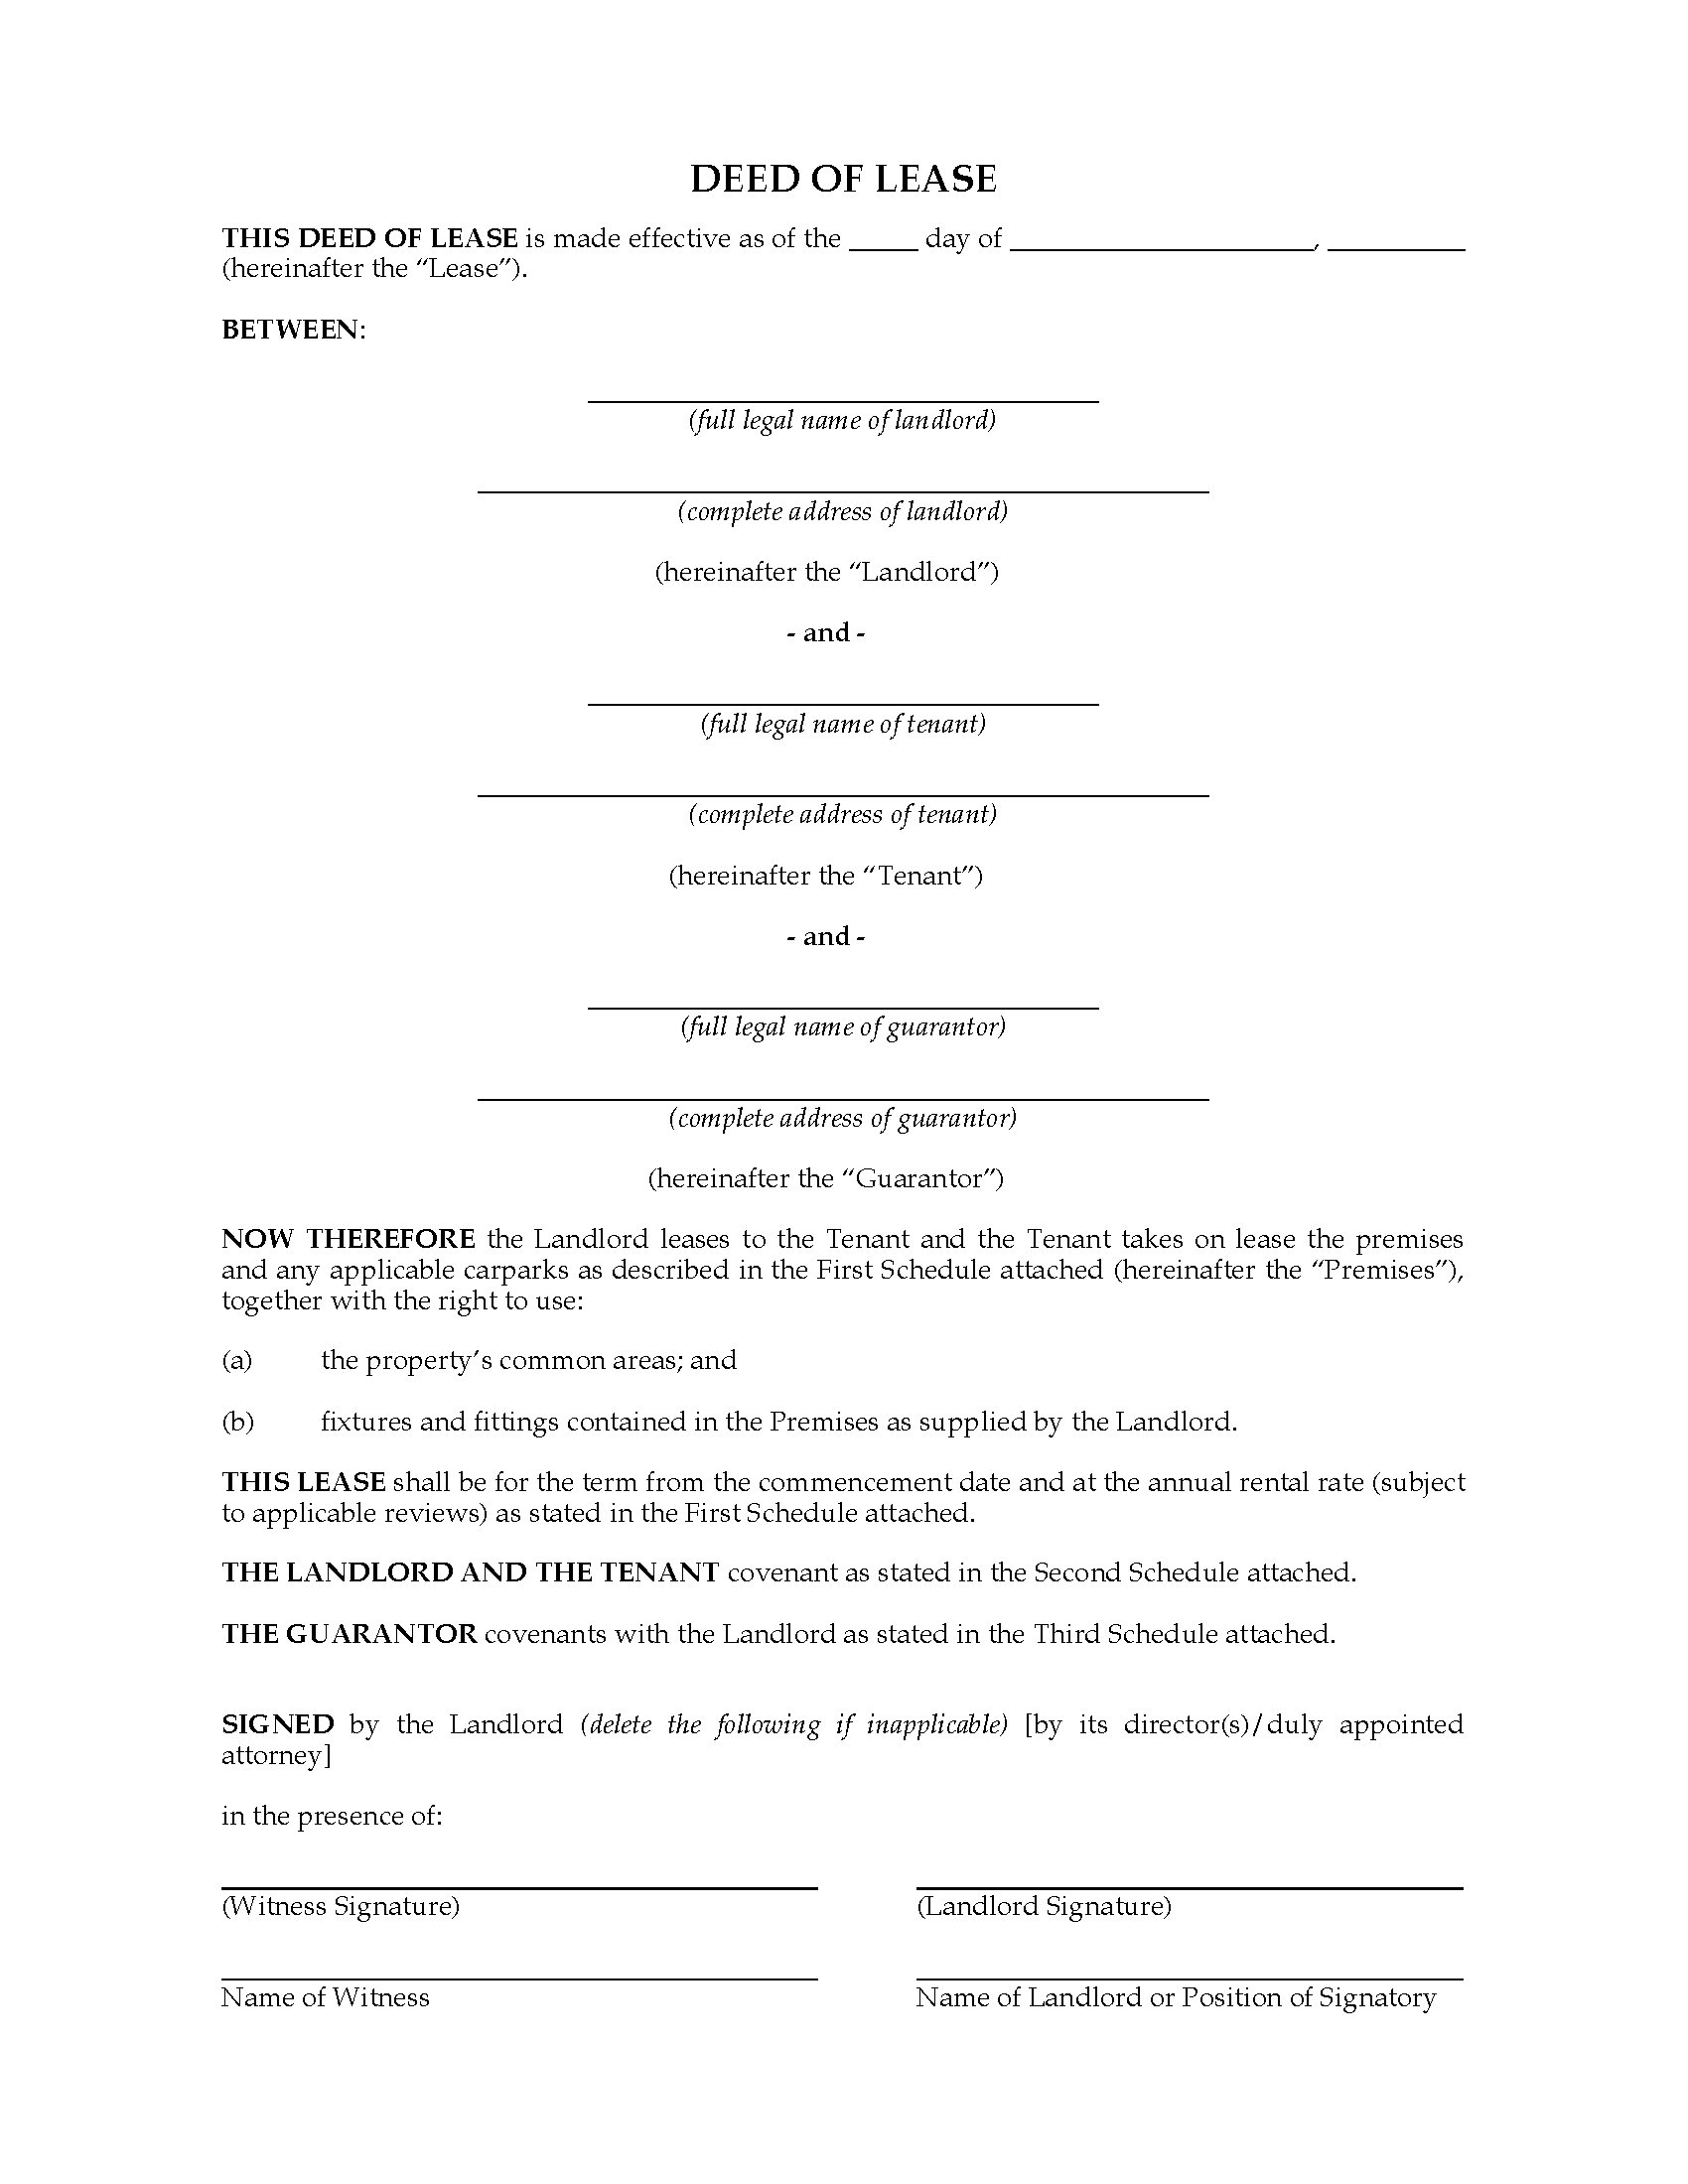 New Zealand Deed of Lease for Commercial Property  Legal Forms In rental agreement template new zealand